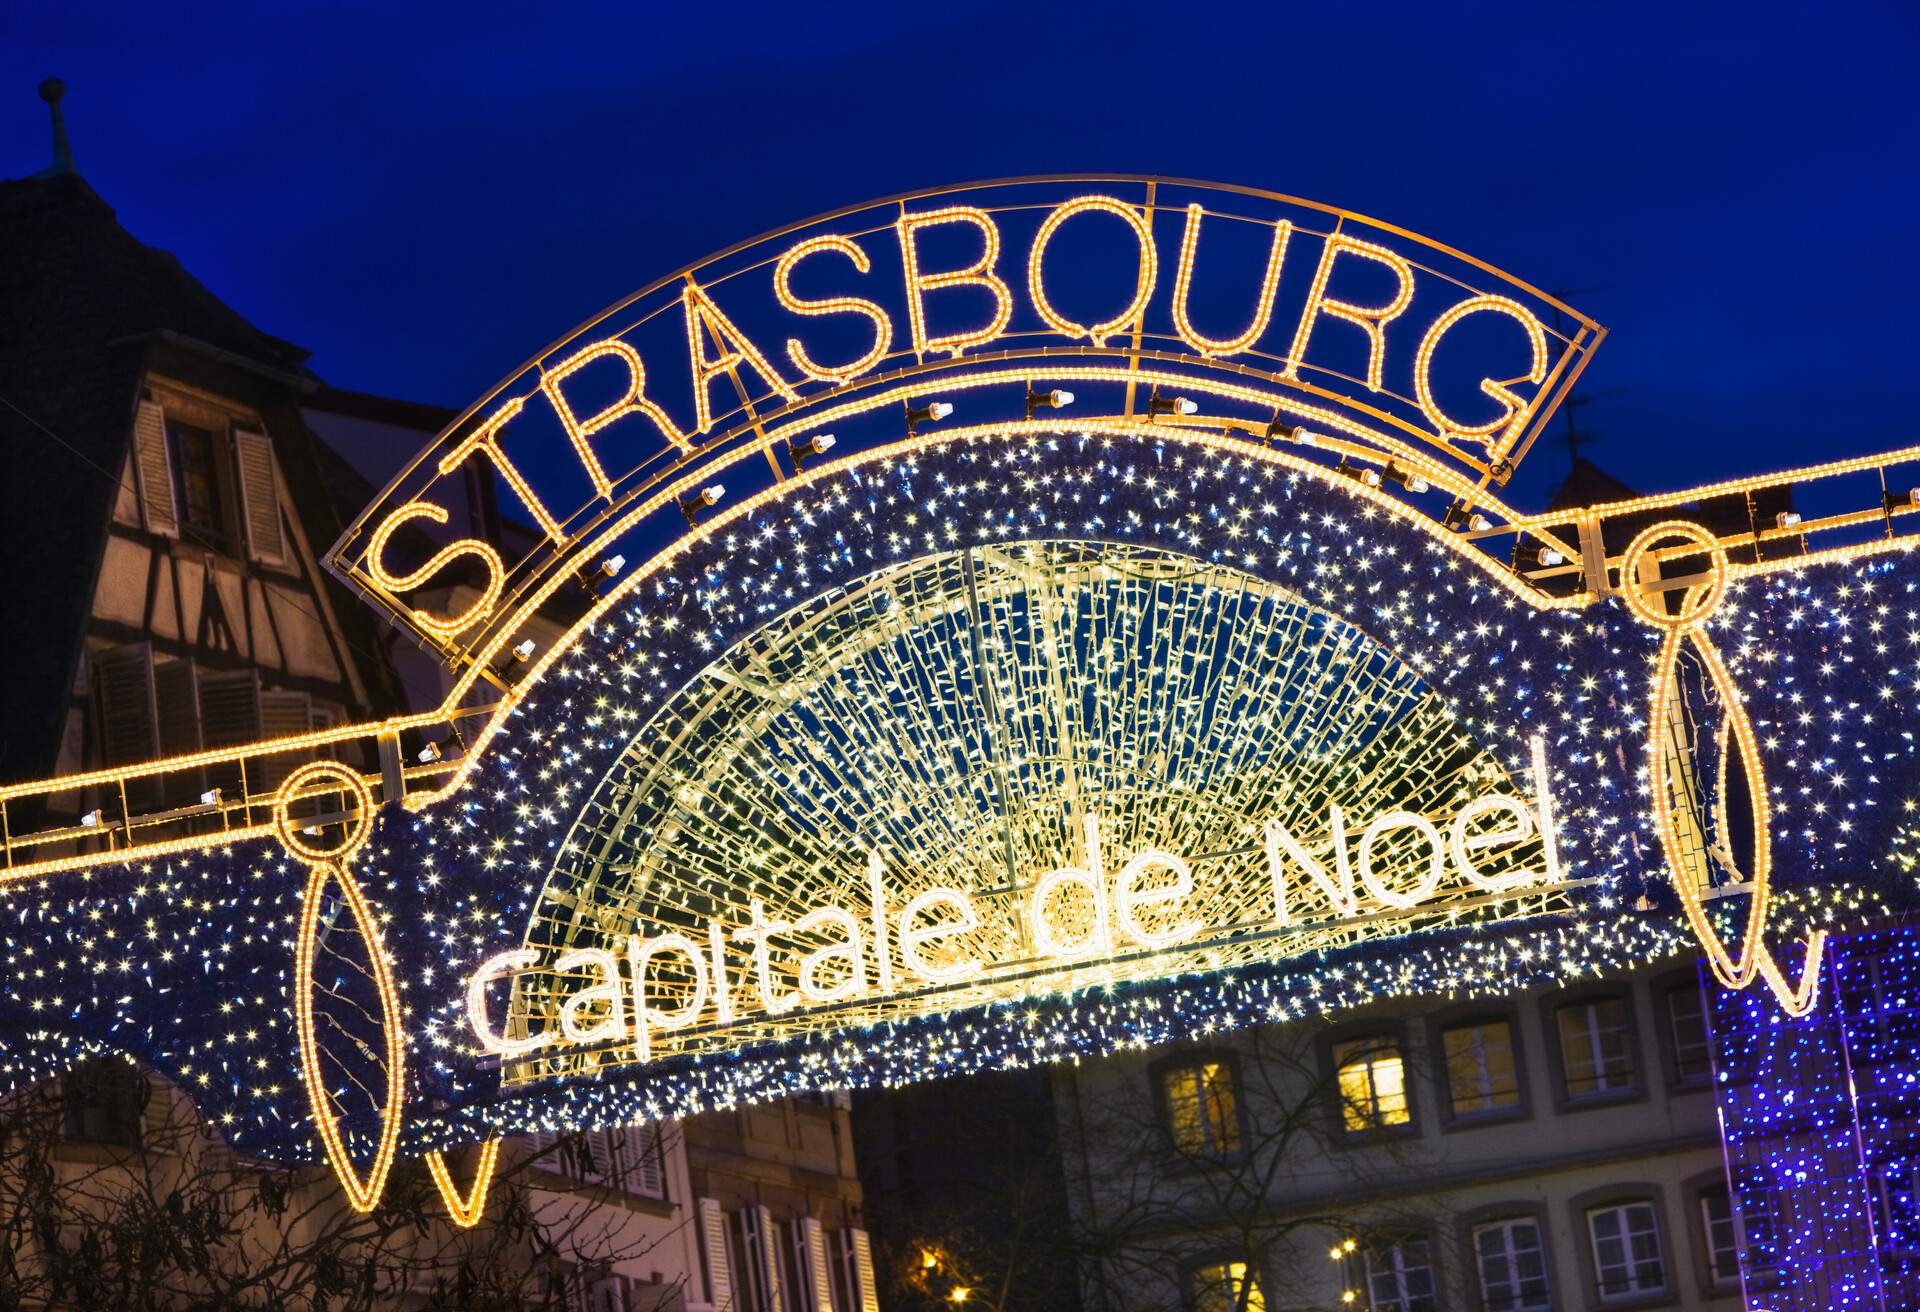 An entrance arch of a Christmas market decorated with string lights.